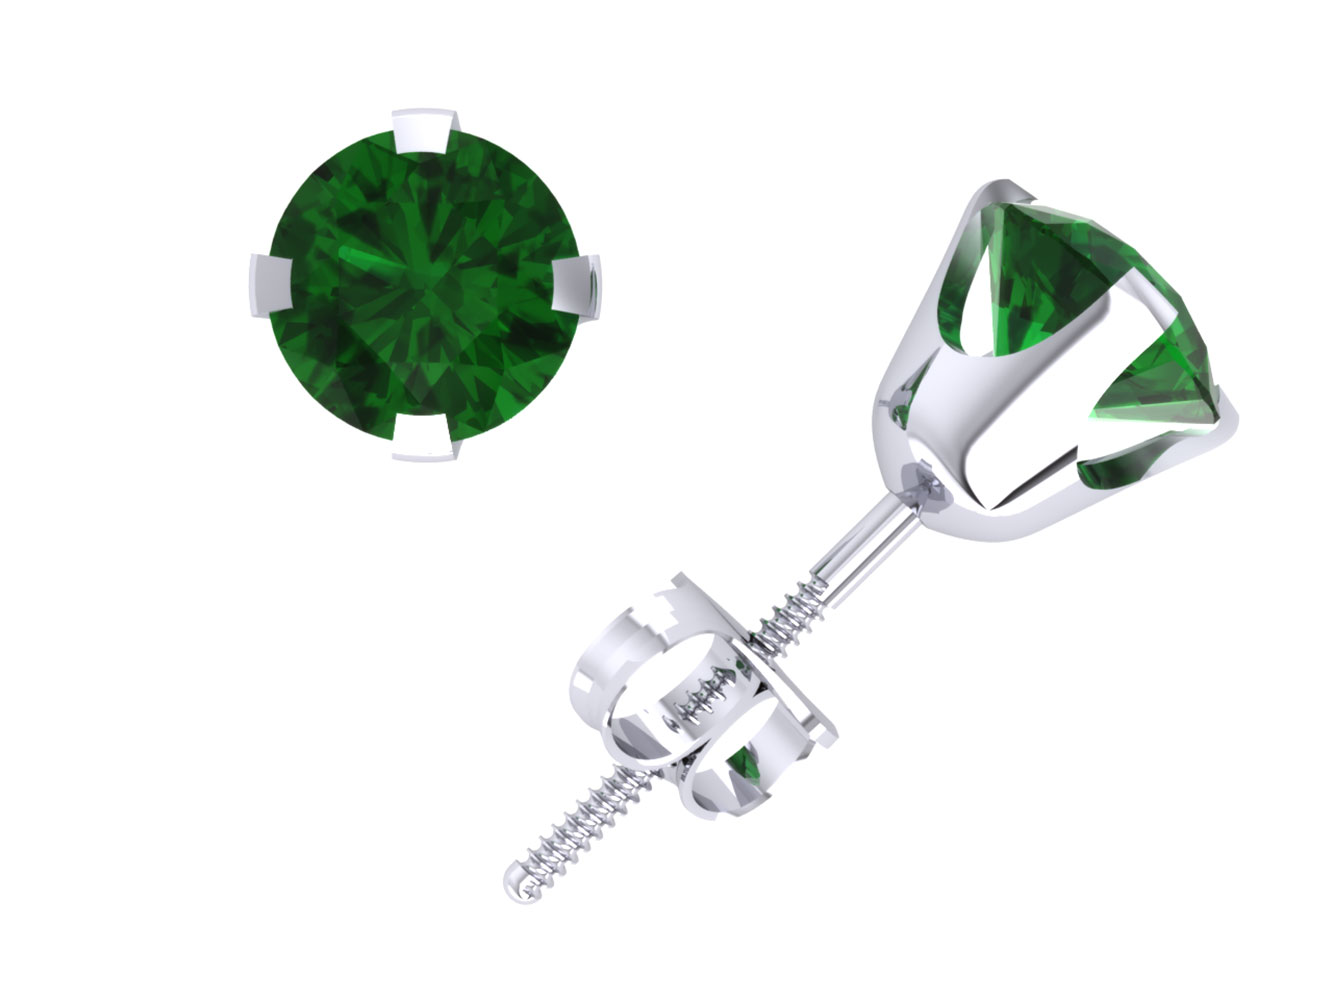 Jewel We Sell 1.25Ct Round Cut Emerald Stud Earrings Solid 14k White or Yellow Gold 4Prong ScrewBack AA Quality